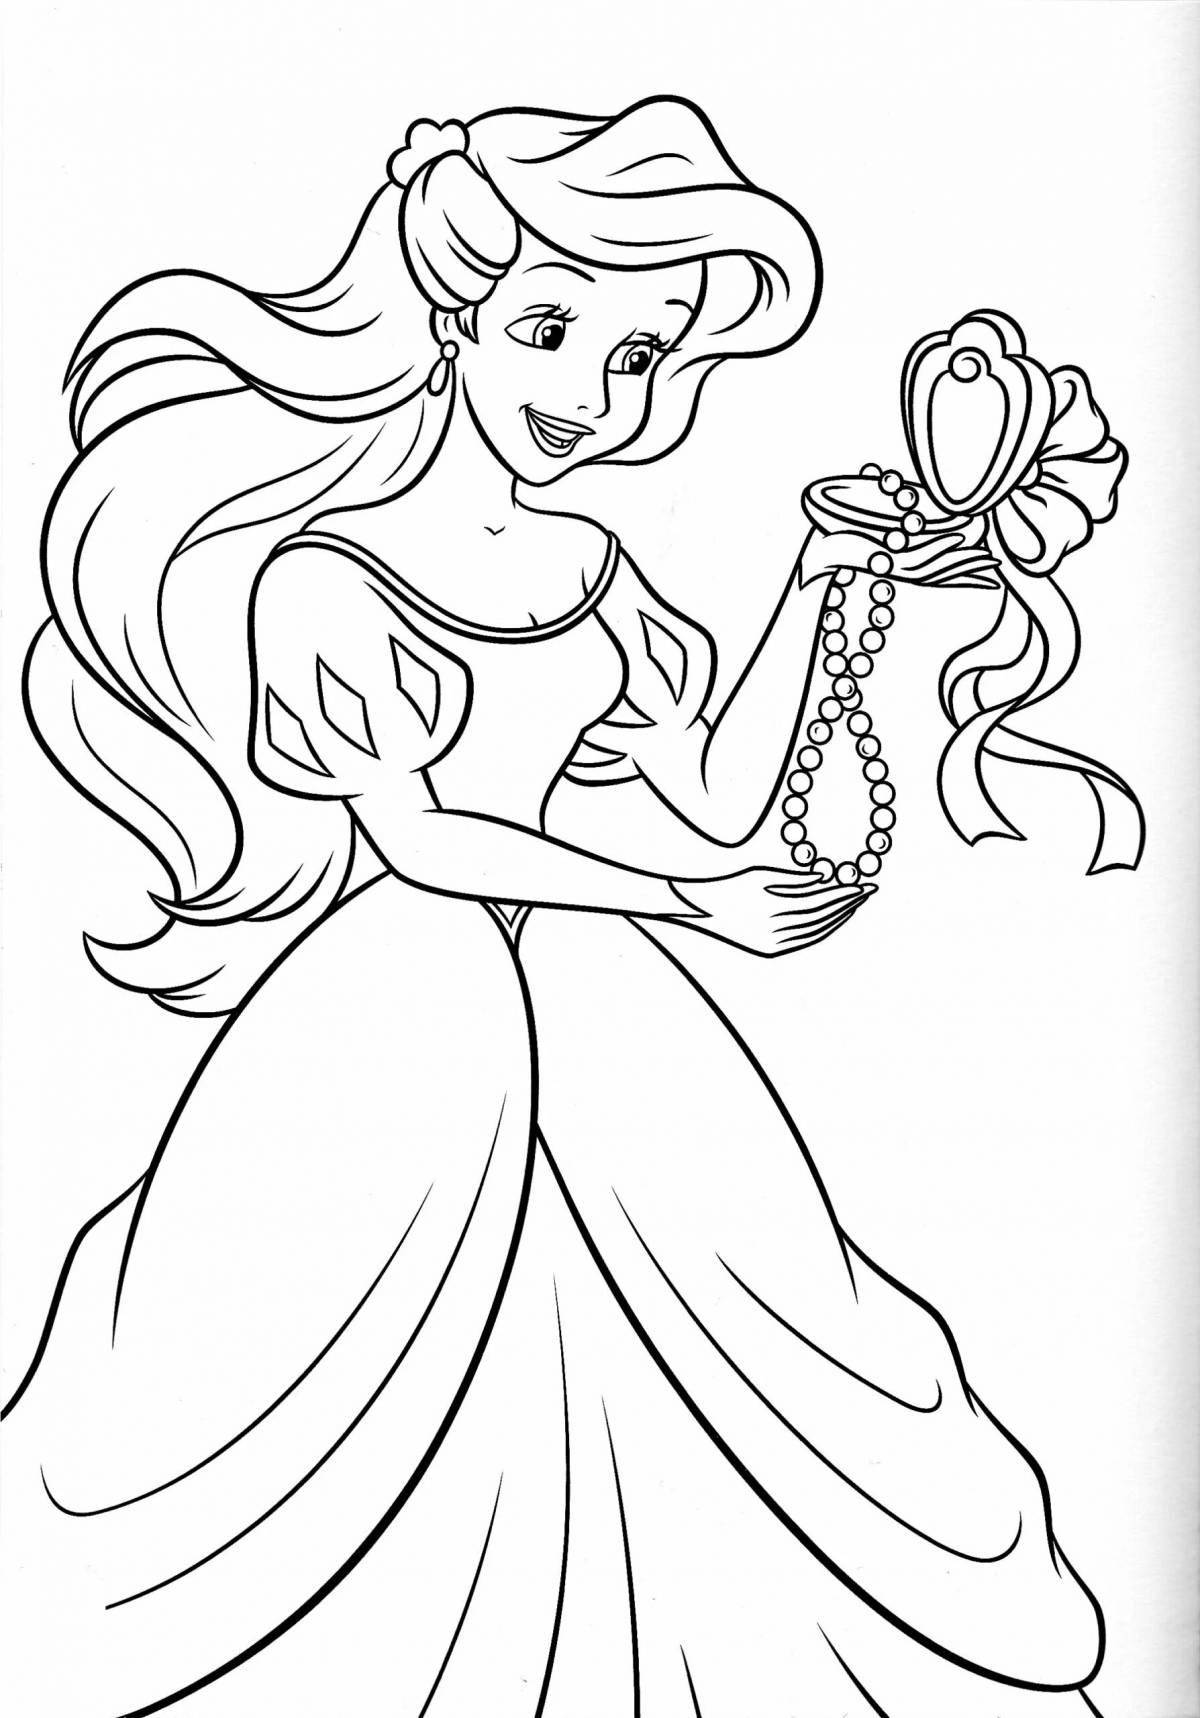 Shining coloring book for girls 6-7 years old princess